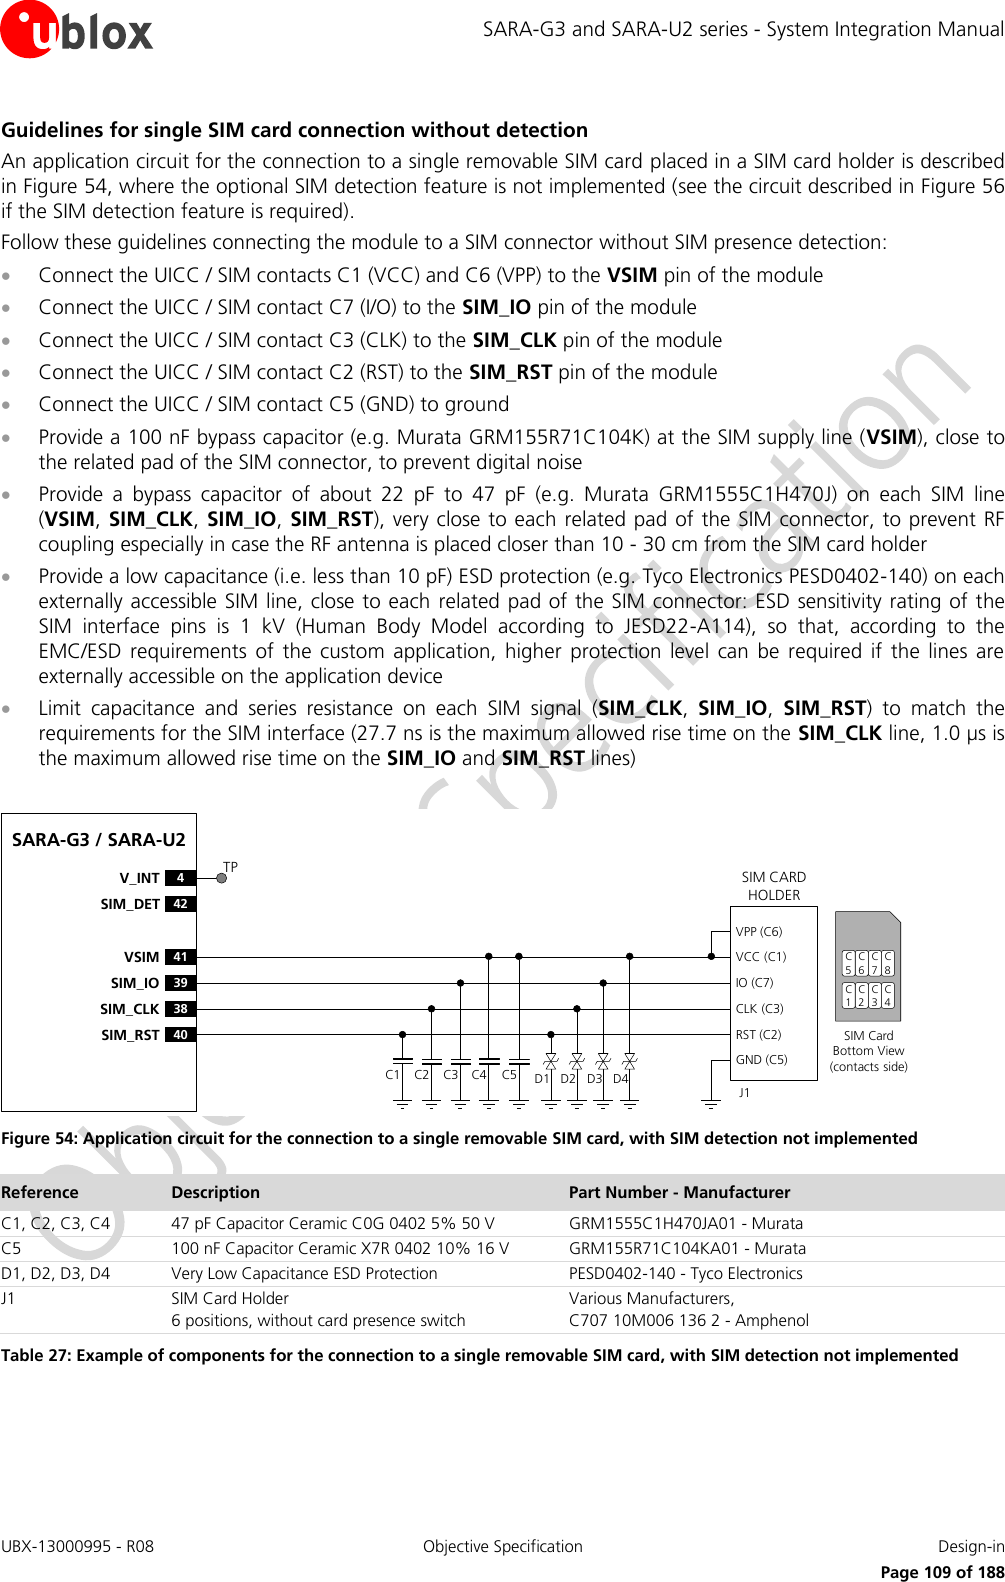 SARA-G3 and SARA-U2 series - System Integration Manual UBX-13000995 - R08  Objective Specification  Design-in     Page 109 of 188 Guidelines for single SIM card connection without detection An application circuit for the connection to a single removable SIM card placed in a SIM card holder is described in Figure 54, where the optional SIM detection feature is not implemented (see the circuit described in Figure 56 if the SIM detection feature is required). Follow these guidelines connecting the module to a SIM connector without SIM presence detection:  Connect the UICC / SIM contacts C1 (VCC) and C6 (VPP) to the VSIM pin of the module  Connect the UICC / SIM contact C7 (I/O) to the SIM_IO pin of the module  Connect the UICC / SIM contact C3 (CLK) to the SIM_CLK pin of the module  Connect the UICC / SIM contact C2 (RST) to the SIM_RST pin of the module  Connect the UICC / SIM contact C5 (GND) to ground  Provide a 100 nF bypass capacitor (e.g. Murata GRM155R71C104K) at the SIM supply line (VSIM), close to the related pad of the SIM connector, to prevent digital noise  Provide  a  bypass  capacitor  of  about  22  pF  to  47  pF  (e.g.  Murata  GRM1555C1H470J)  on  each  SIM  line (VSIM, SIM_CLK, SIM_IO, SIM_RST), very close to each related pad of the SIM connector, to prevent RF coupling especially in case the RF antenna is placed closer than 10 - 30 cm from the SIM card holder  Provide a low capacitance (i.e. less than 10 pF) ESD protection (e.g. Tyco Electronics PESD0402-140) on each externally accessible SIM line, close to each  related pad of the SIM connector: ESD sensitivity rating of the SIM  interface  pins  is  1  kV  (Human  Body  Model  according  to  JESD22-A114),  so  that,  according  to  the EMC/ESD  requirements  of  the  custom  application,  higher  protection  level  can  be  required  if  the  lines  are externally accessible on the application device  Limit  capacitance  and  series  resistance  on  each  SIM  signal  (SIM_CLK,  SIM_IO,  SIM_RST)  to  match  the requirements for the SIM interface (27.7 ns is the maximum allowed rise time on the SIM_CLK line, 1.0 µs is the maximum allowed rise time on the SIM_IO and SIM_RST lines)  SARA-G3 / SARA-U241VSIM39SIM_IO38SIM_CLK40SIM_RST4V_INT42SIM_DETSIM CARD HOLDERC5C6C7C1C2C3SIM Card Bottom View (contacts side)C1VPP (C6)VCC (C1)IO (C7)CLK (C3)RST (C2)GND (C5)C2 C3 C5J1C4 D1 D2 D3 D4C8C4TP Figure 54: Application circuit for the connection to a single removable SIM card, with SIM detection not implemented Reference Description Part Number - Manufacturer C1, C2, C3, C4 47 pF Capacitor Ceramic C0G 0402 5% 50 V GRM1555C1H470JA01 - Murata C5 100 nF Capacitor Ceramic X7R 0402 10% 16 V GRM155R71C104KA01 - Murata D1, D2, D3, D4 Very Low Capacitance ESD Protection PESD0402-140 - Tyco Electronics  J1 SIM Card Holder 6 positions, without card presence switch Various Manufacturers, C707 10M006 136 2 - Amphenol Table 27: Example of components for the connection to a single removable SIM card, with SIM detection not implemented  